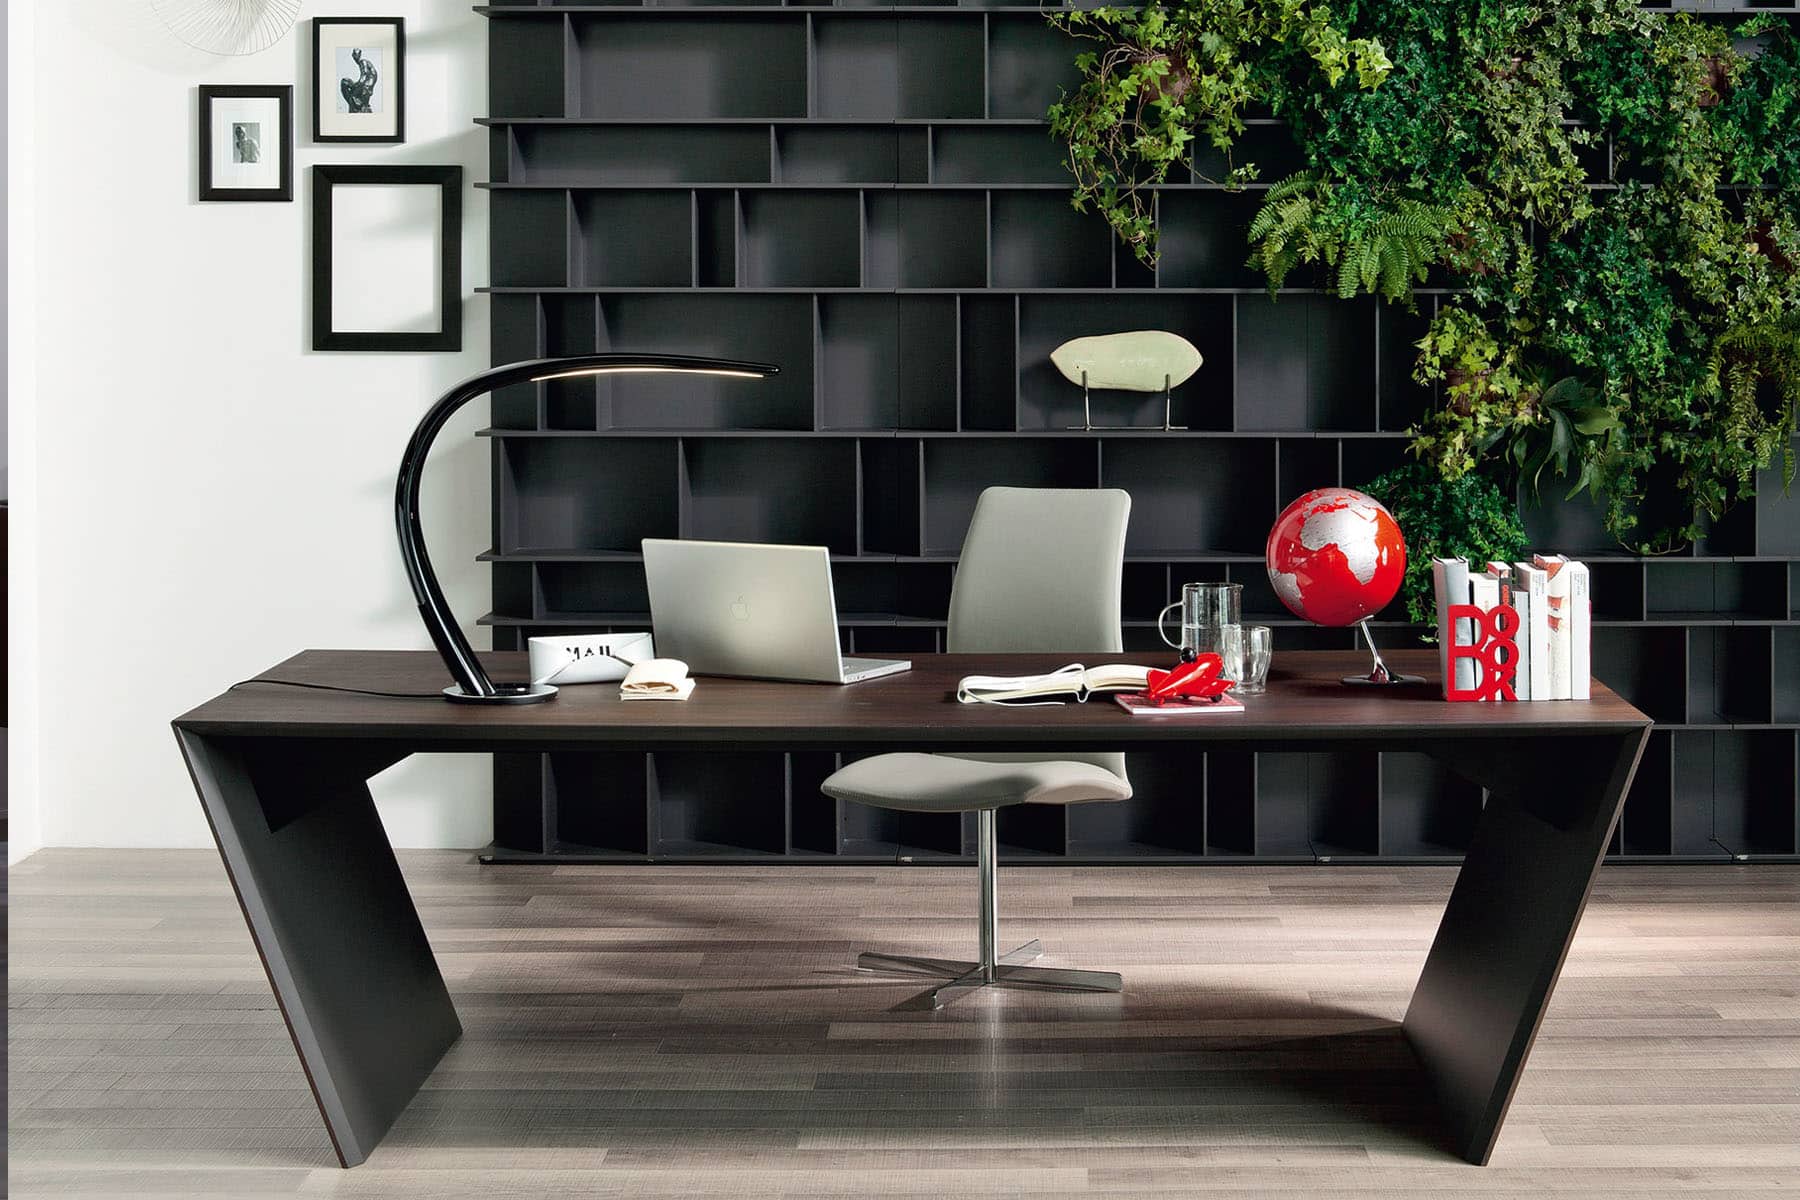 Use Plants & Greenery To Your Contemporary Office | Designer Tips | San Fran Design